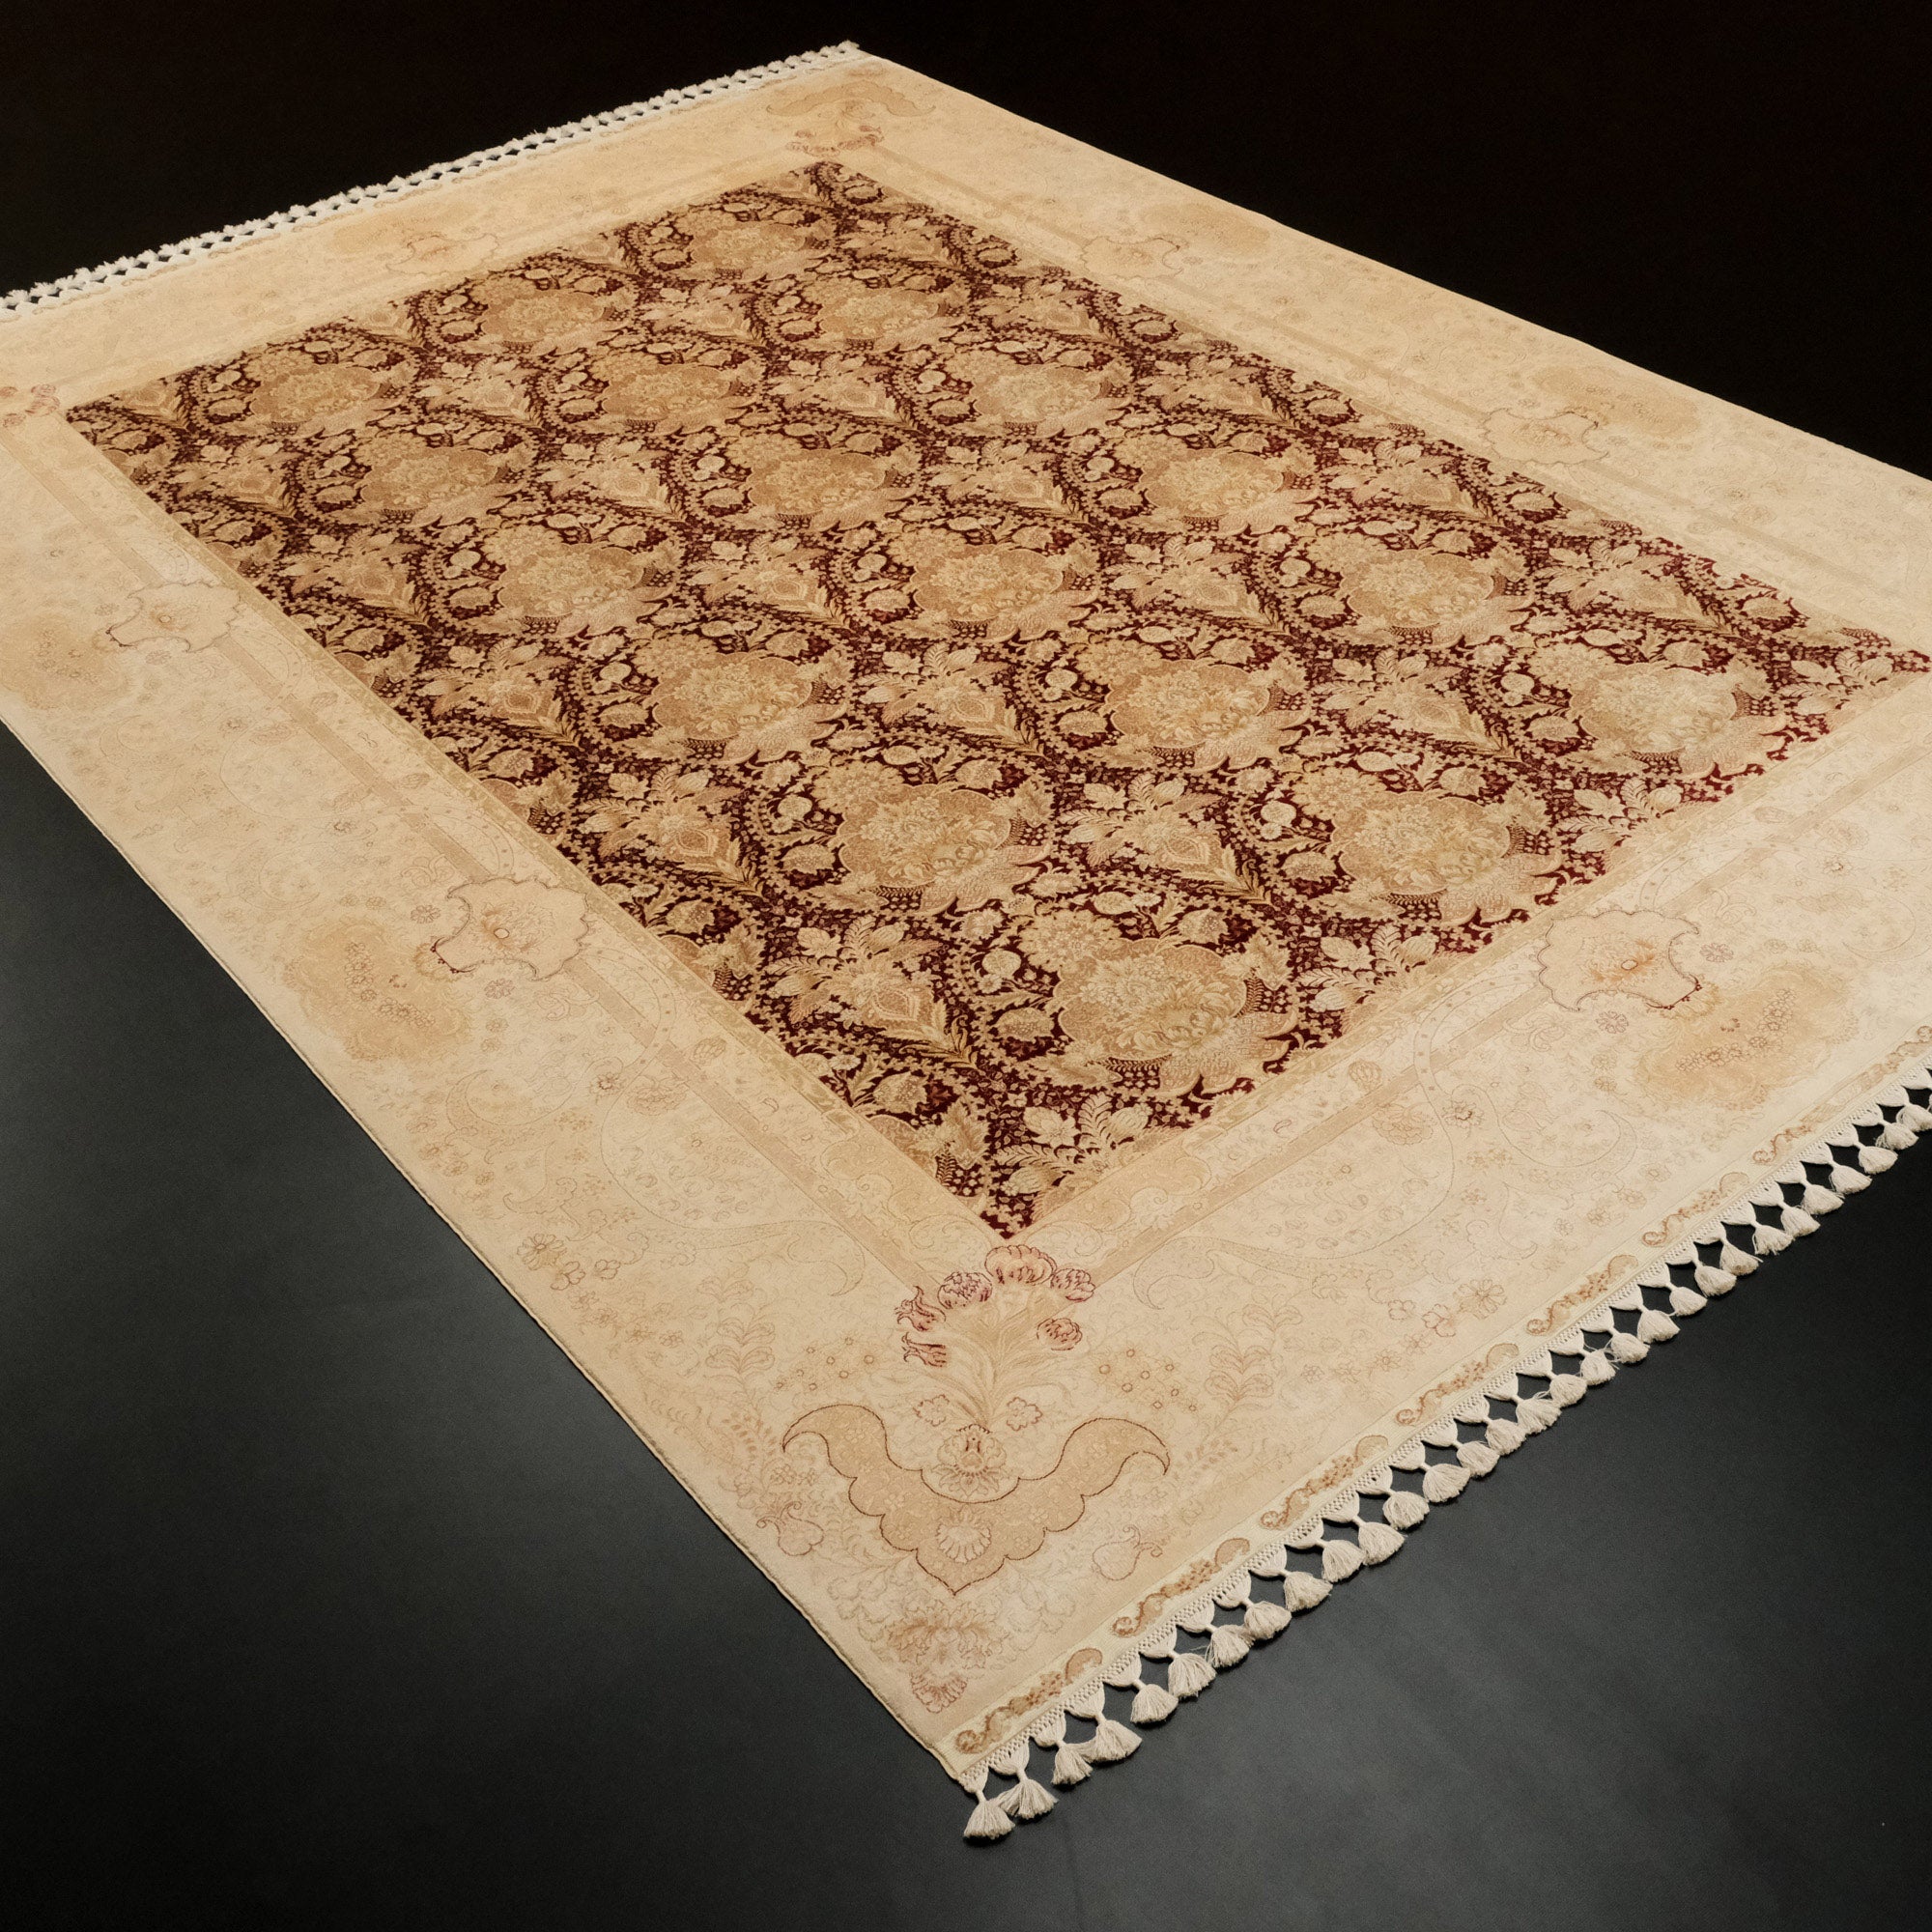 Frame Patterned Hand-Woven Red Classic Silk Carpet